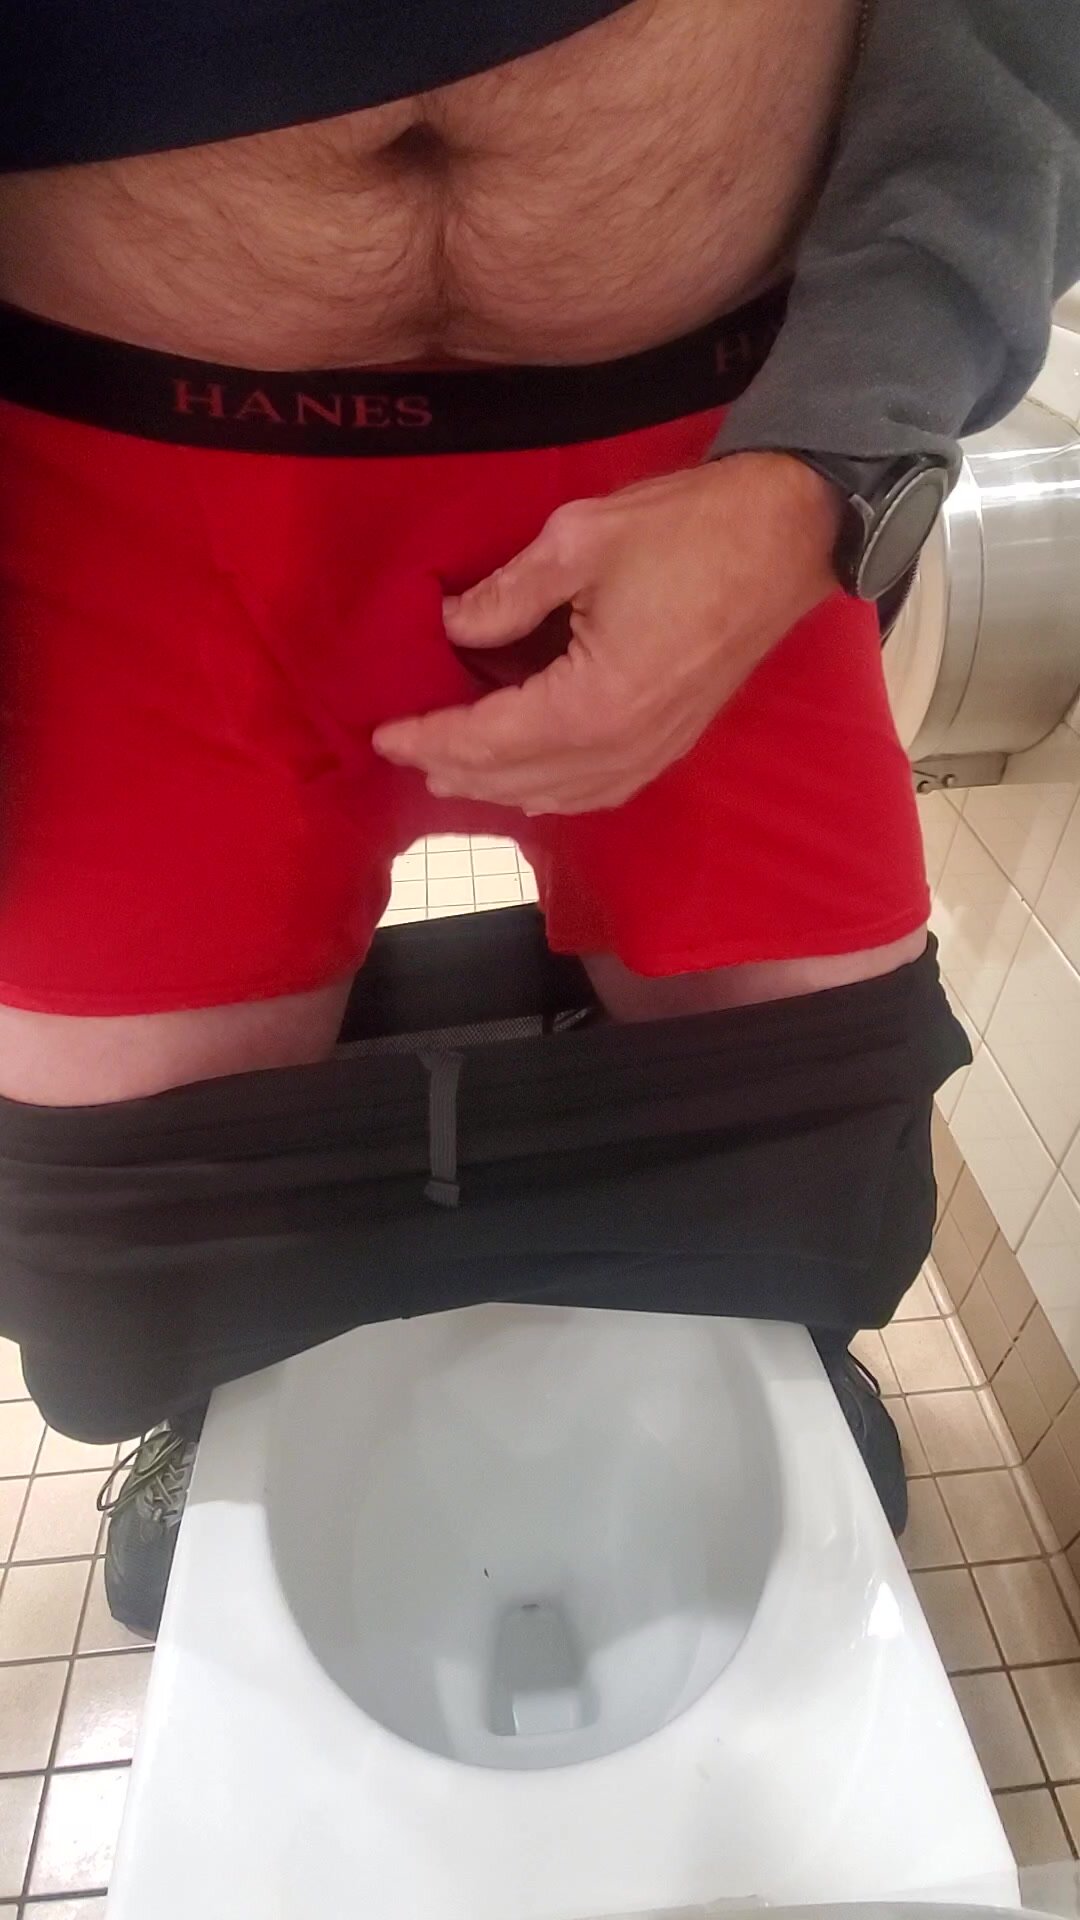 Wetting and cumming in my red hanes at public restroom